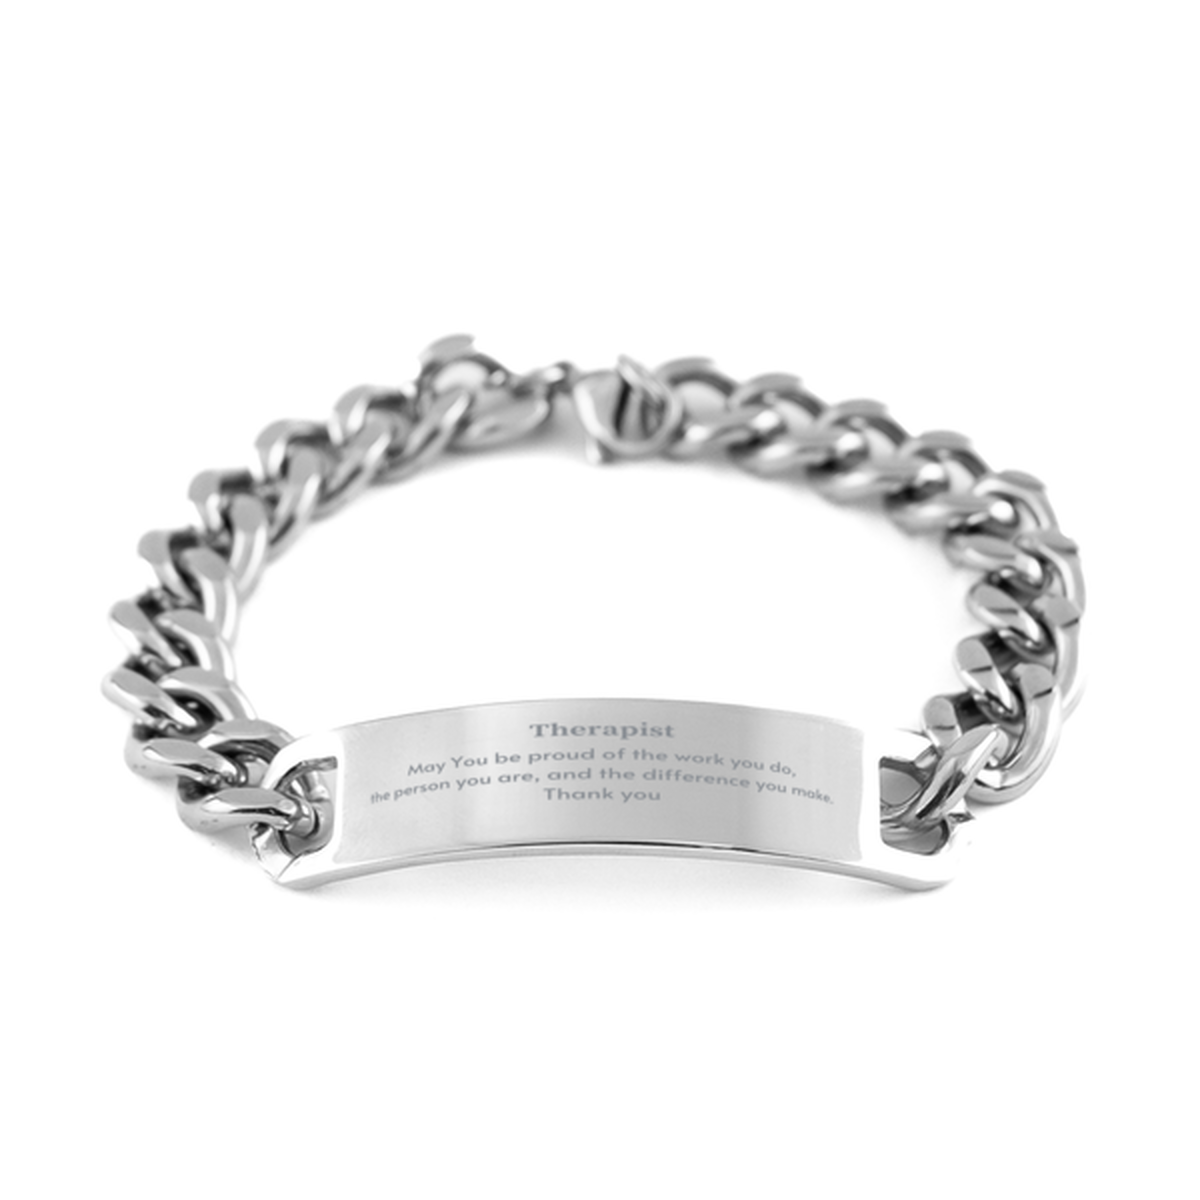 Heartwarming Cuban Chain Stainless Steel Bracelet Retirement Coworkers Gifts for Therapist, Therapist May You be proud of the work you do, the person you are Gifts for Boss Men Women Friends